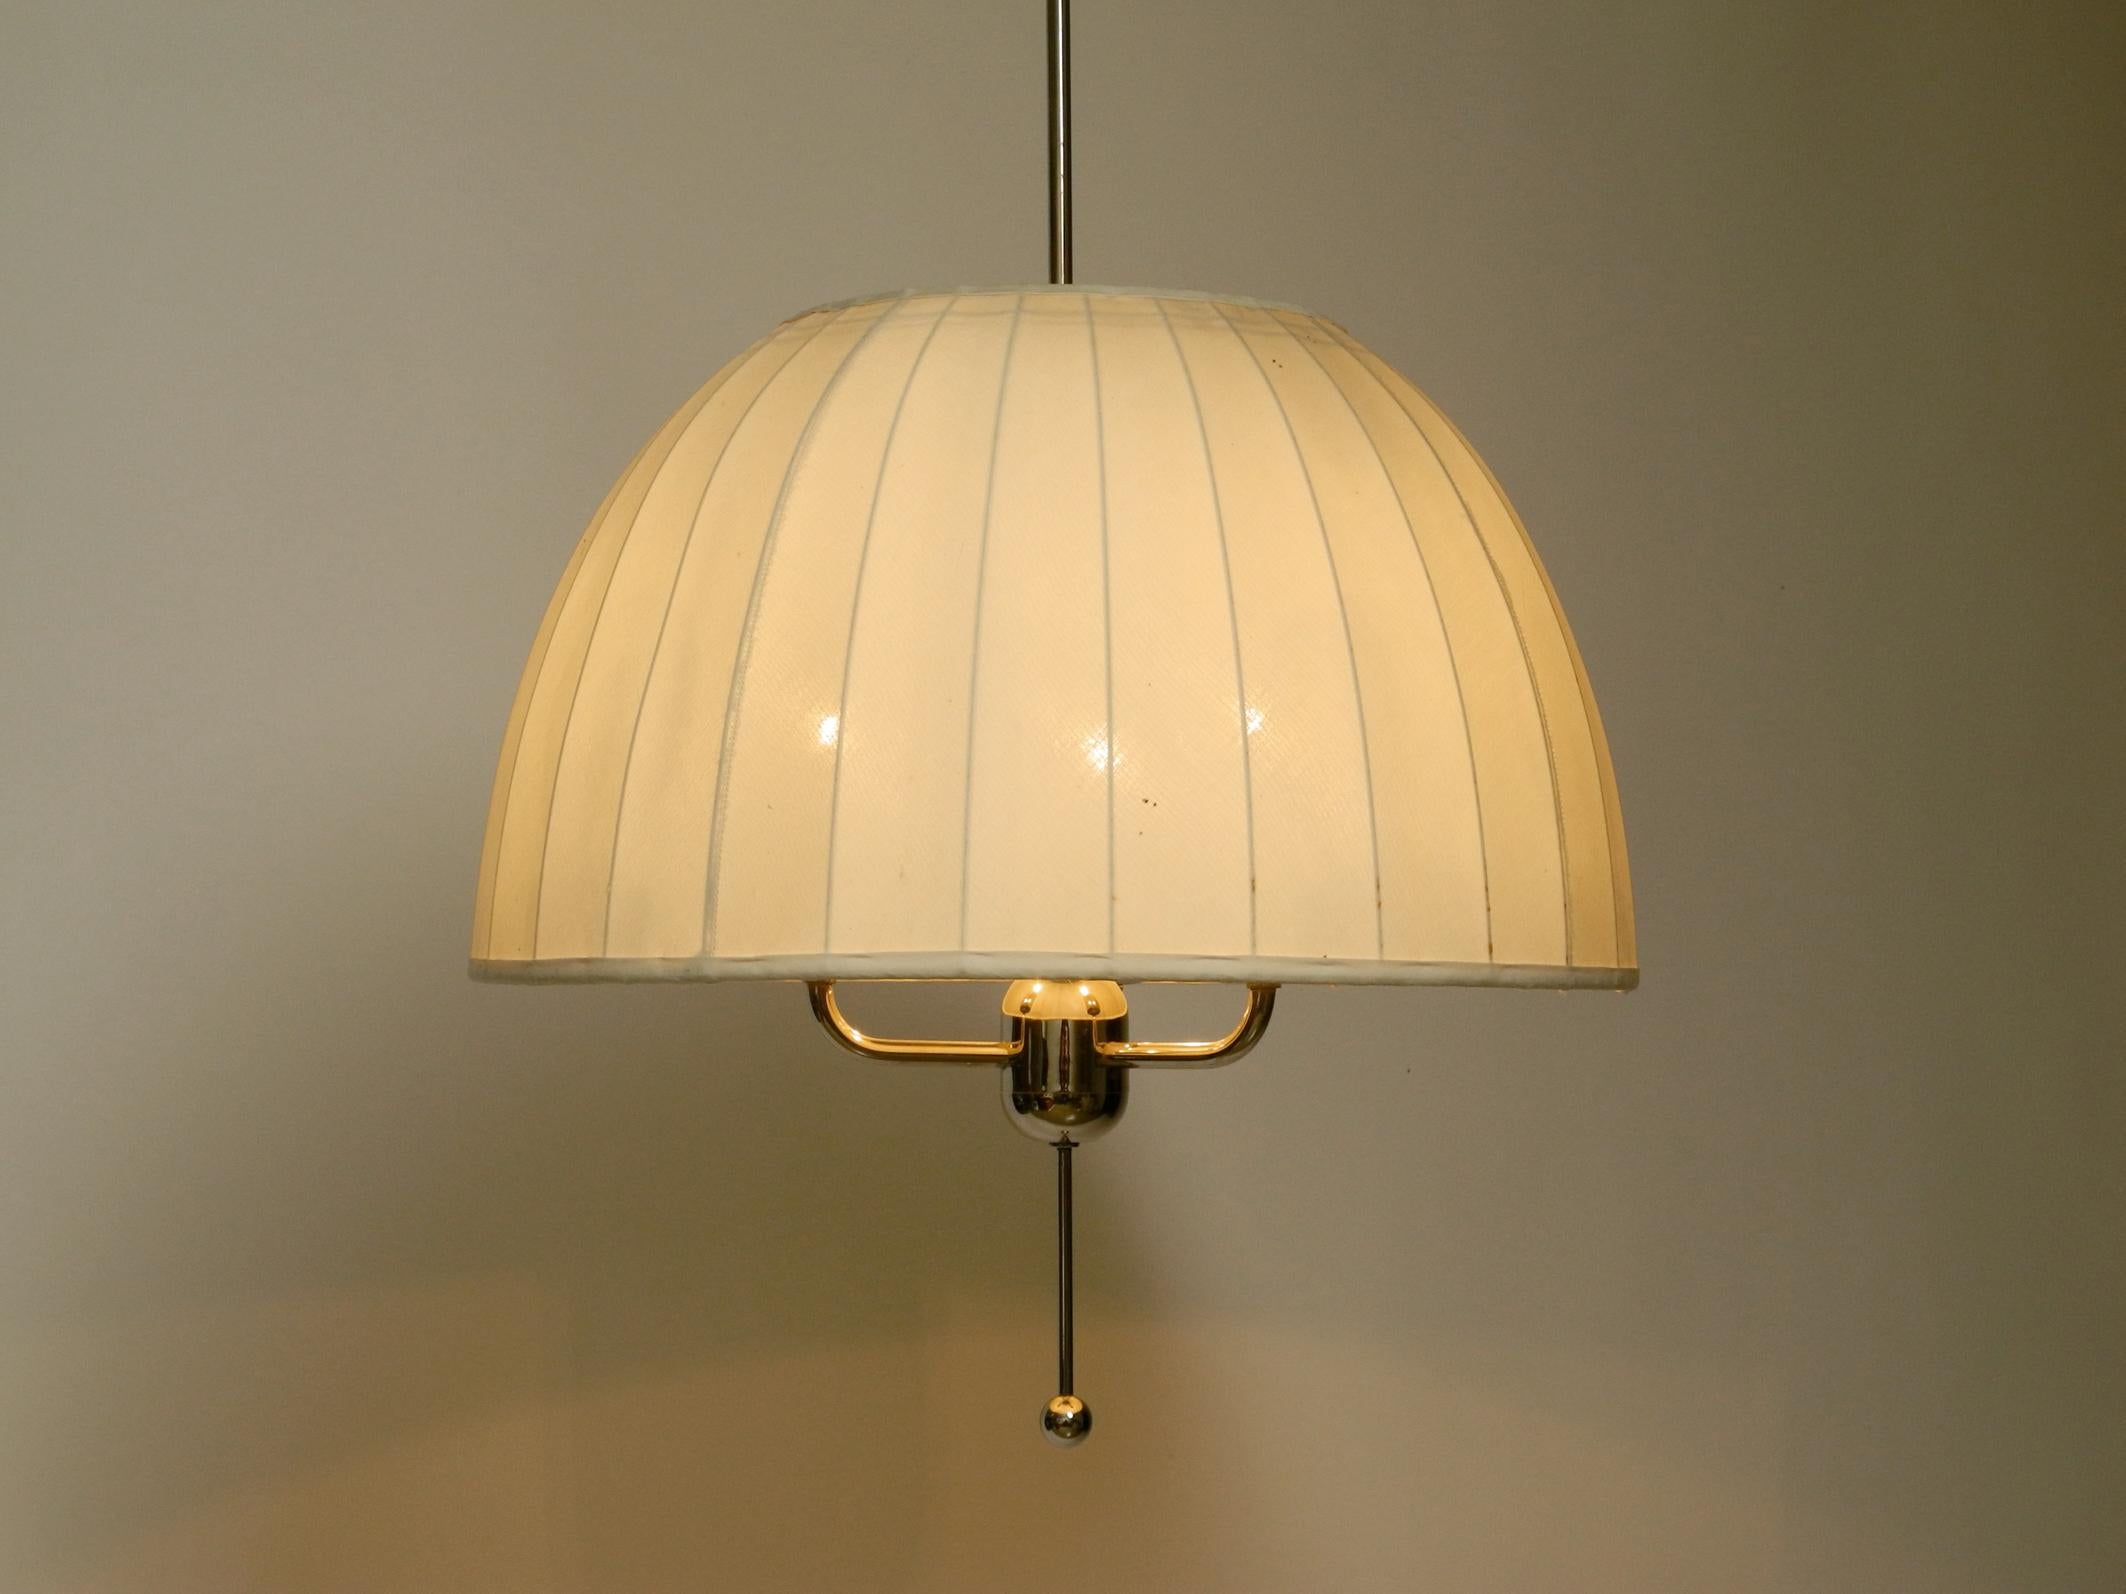 Beautiful original 1960s pendant light “Carolin” model T549.
Designed by Hans-Agne Jakobsson for Markaryd. Made in Sweden.
Complete frame and canopy are made of shiny nickel-plated brass.
The height of the lampshade is adjustable.
The lamp with the